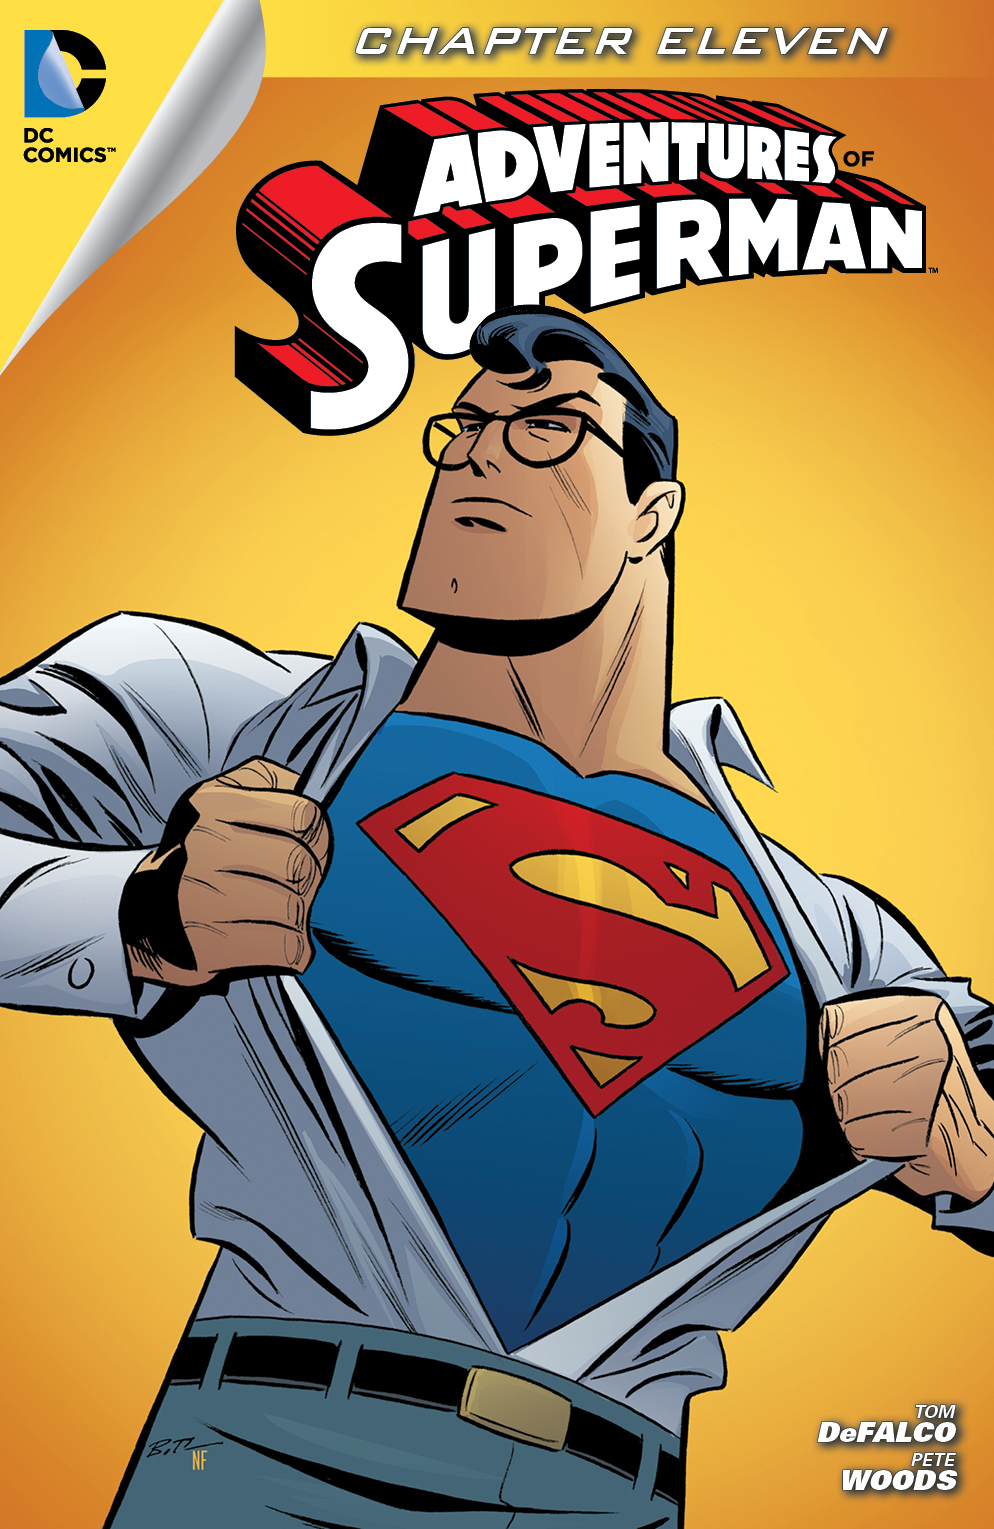 Adventures of Superman (2013-) #11 preview images